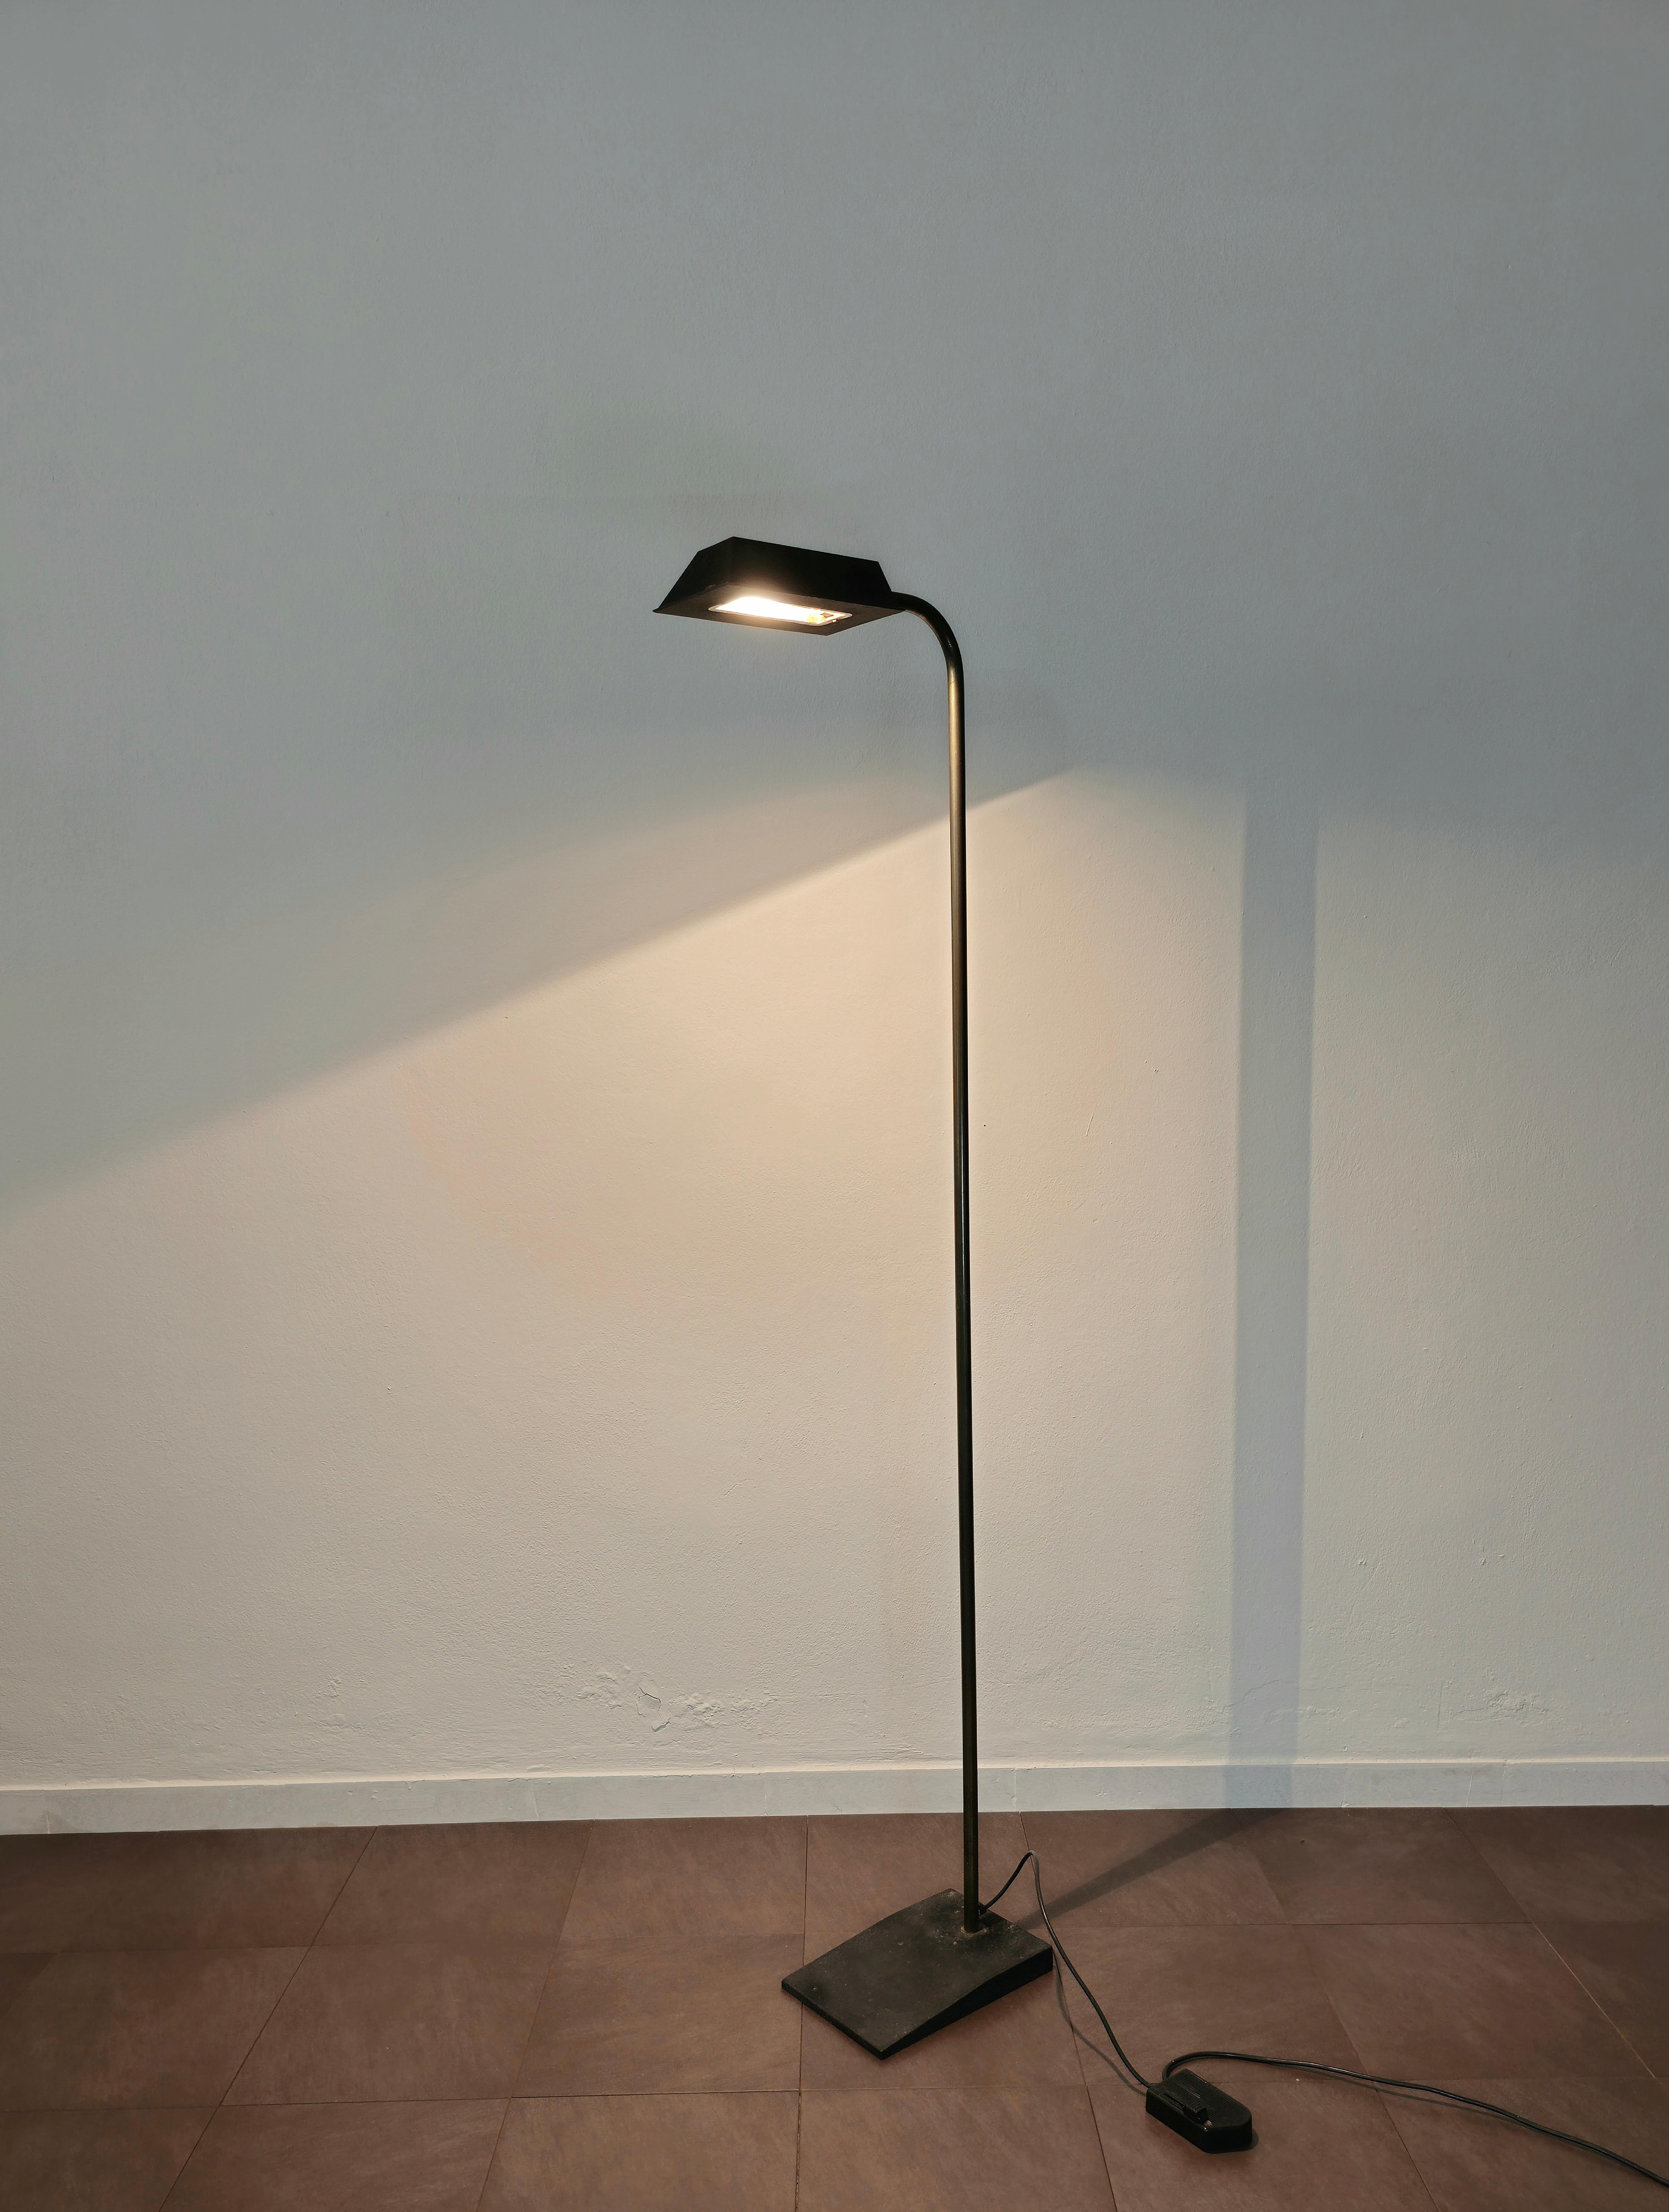 Floor lamp with halogen light produced in Italy in the 60s.
The lamp has a curved stem in burnished brass with a base and diffuser in black enamelled craquelé metal. The diffuser can be oriented to your liking.


Note: We try to offer our customers